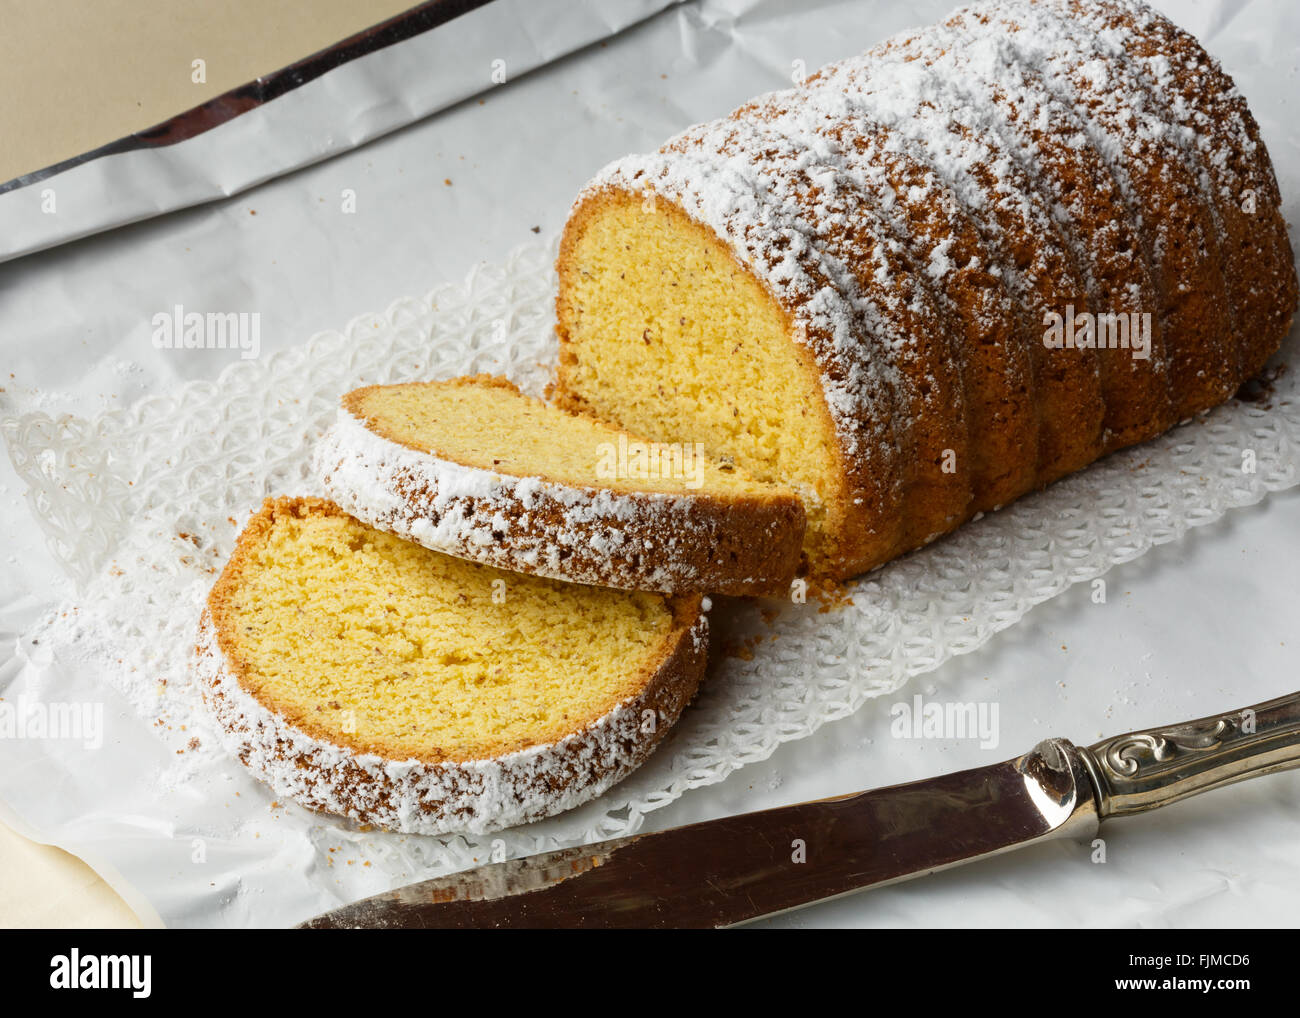 Dolce Varese, made with corn flour and ground almonds, typical cake from Varese, Lombardy, Italy Stock Photo